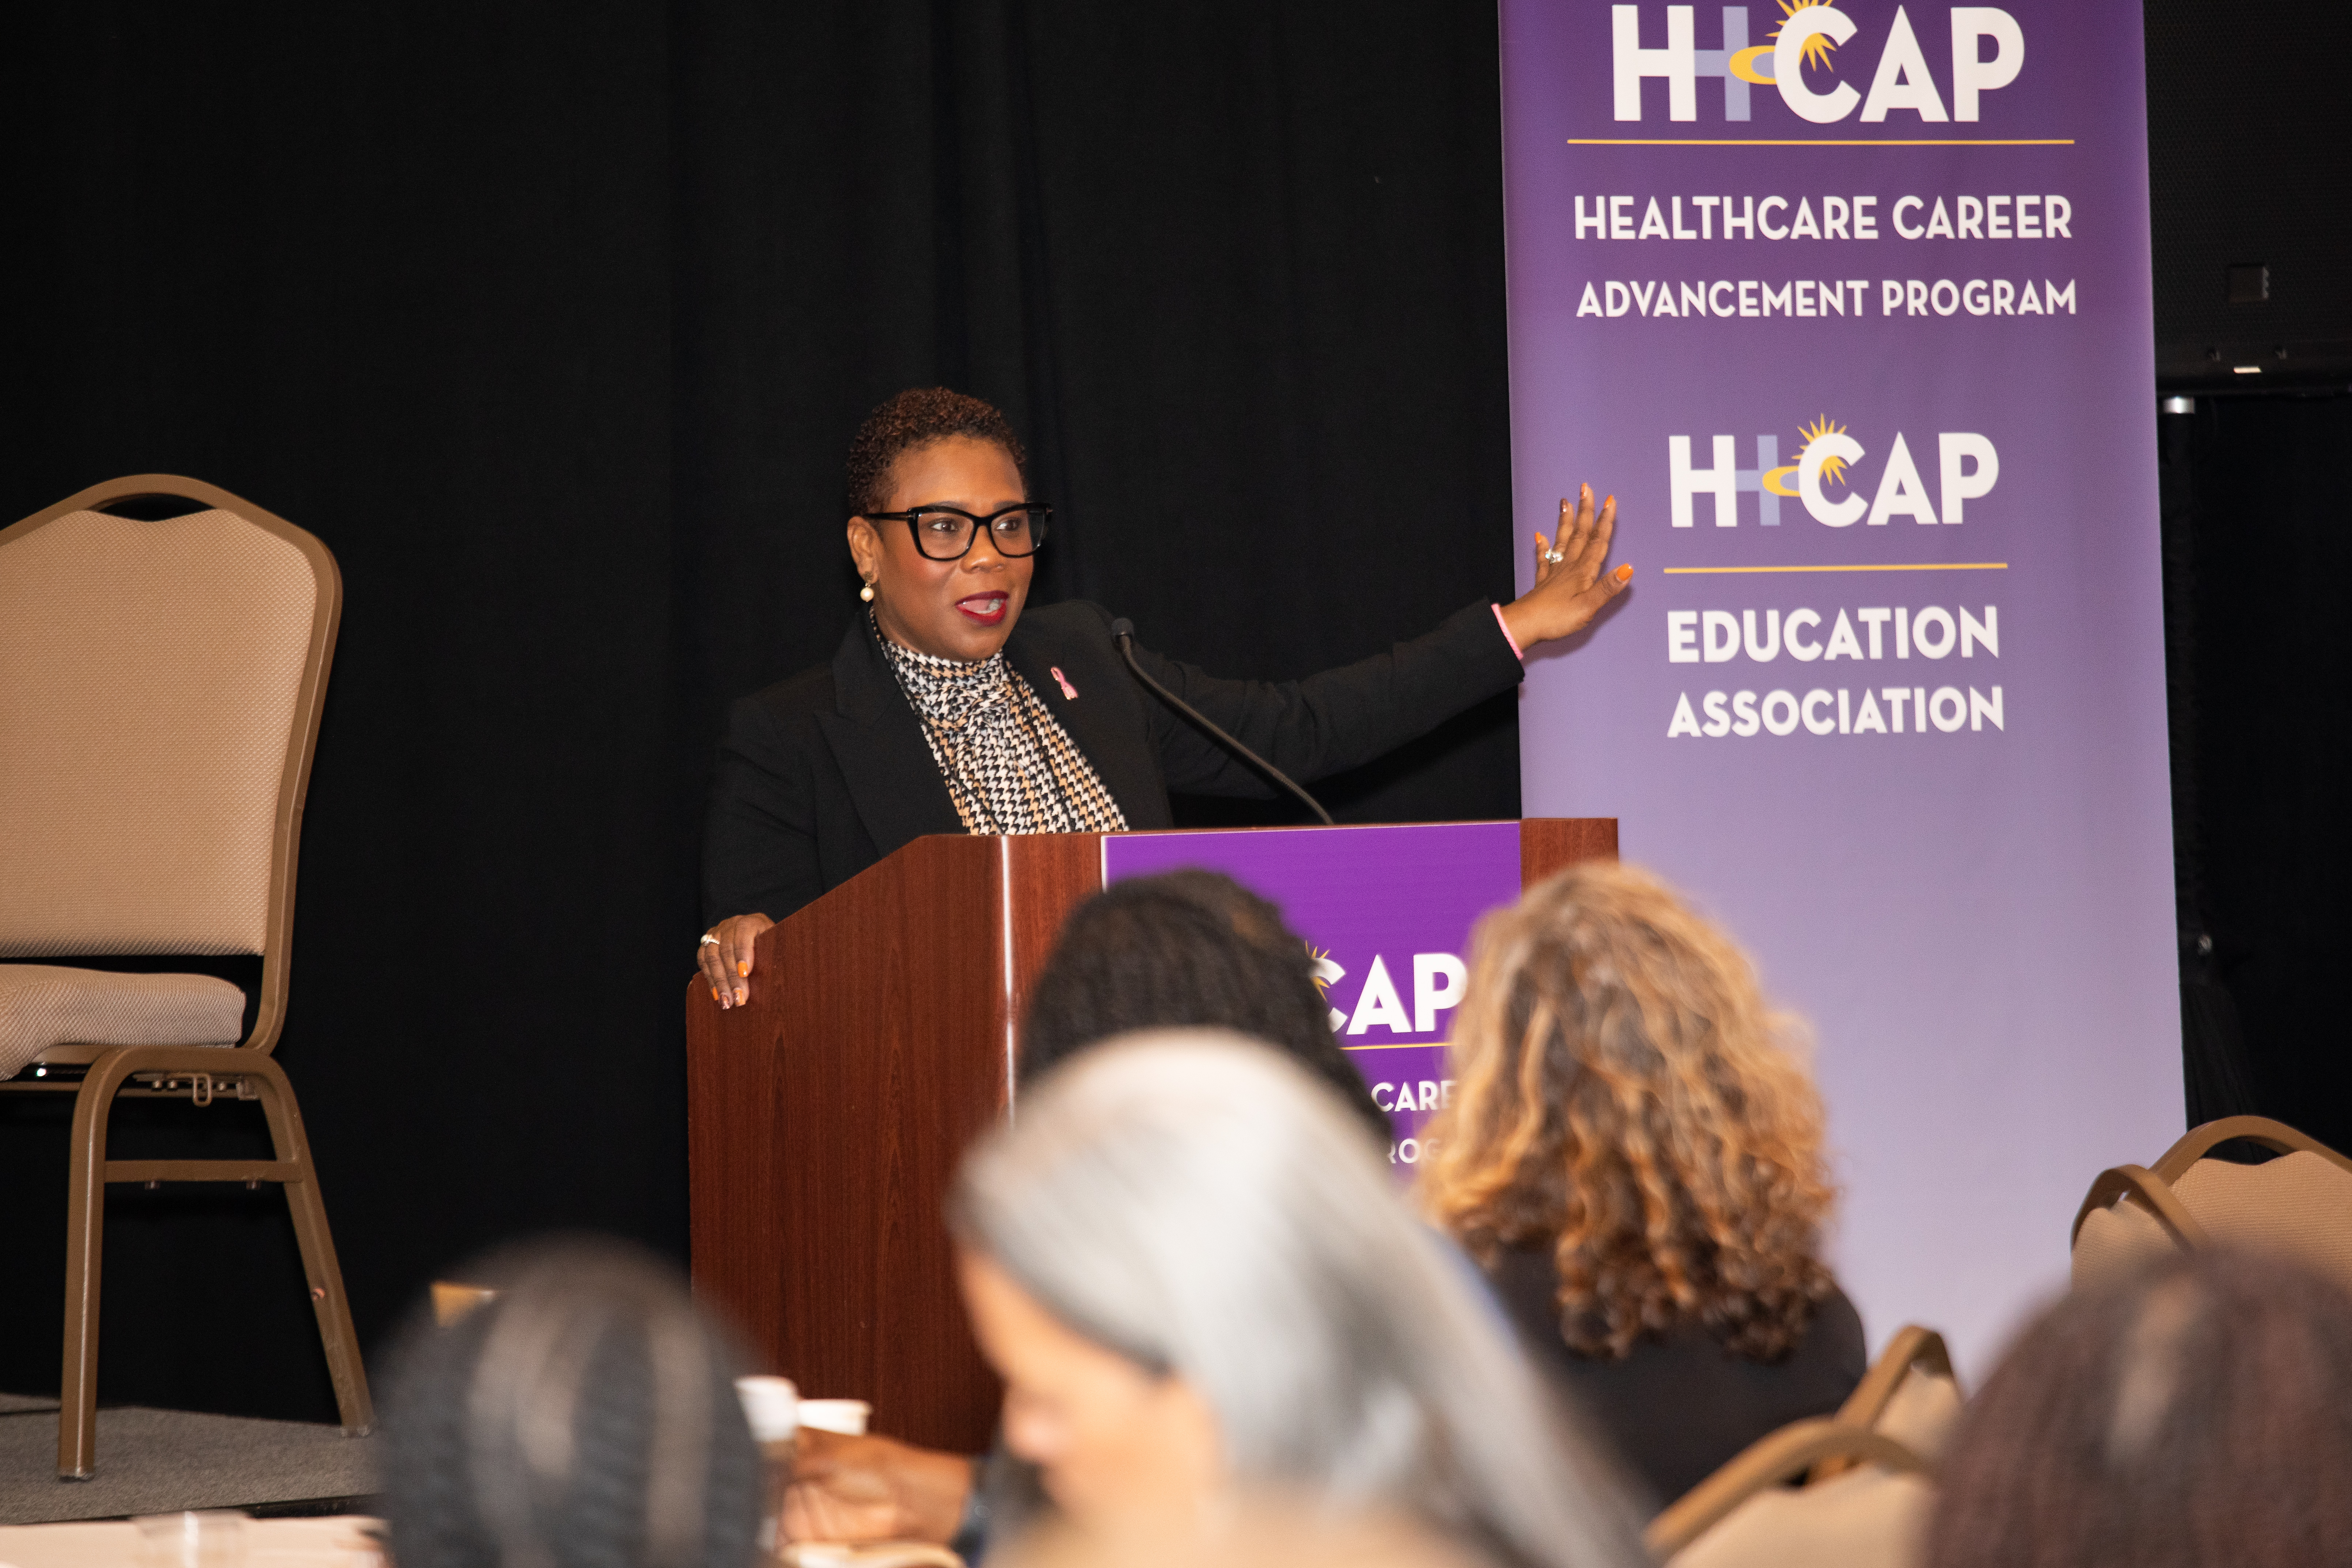 A woman in a dark jacket and glasses speaks at a podium. A banner in the background reads "H-CAP Healthcare Career Advancement Program. H-CAP Education Association."